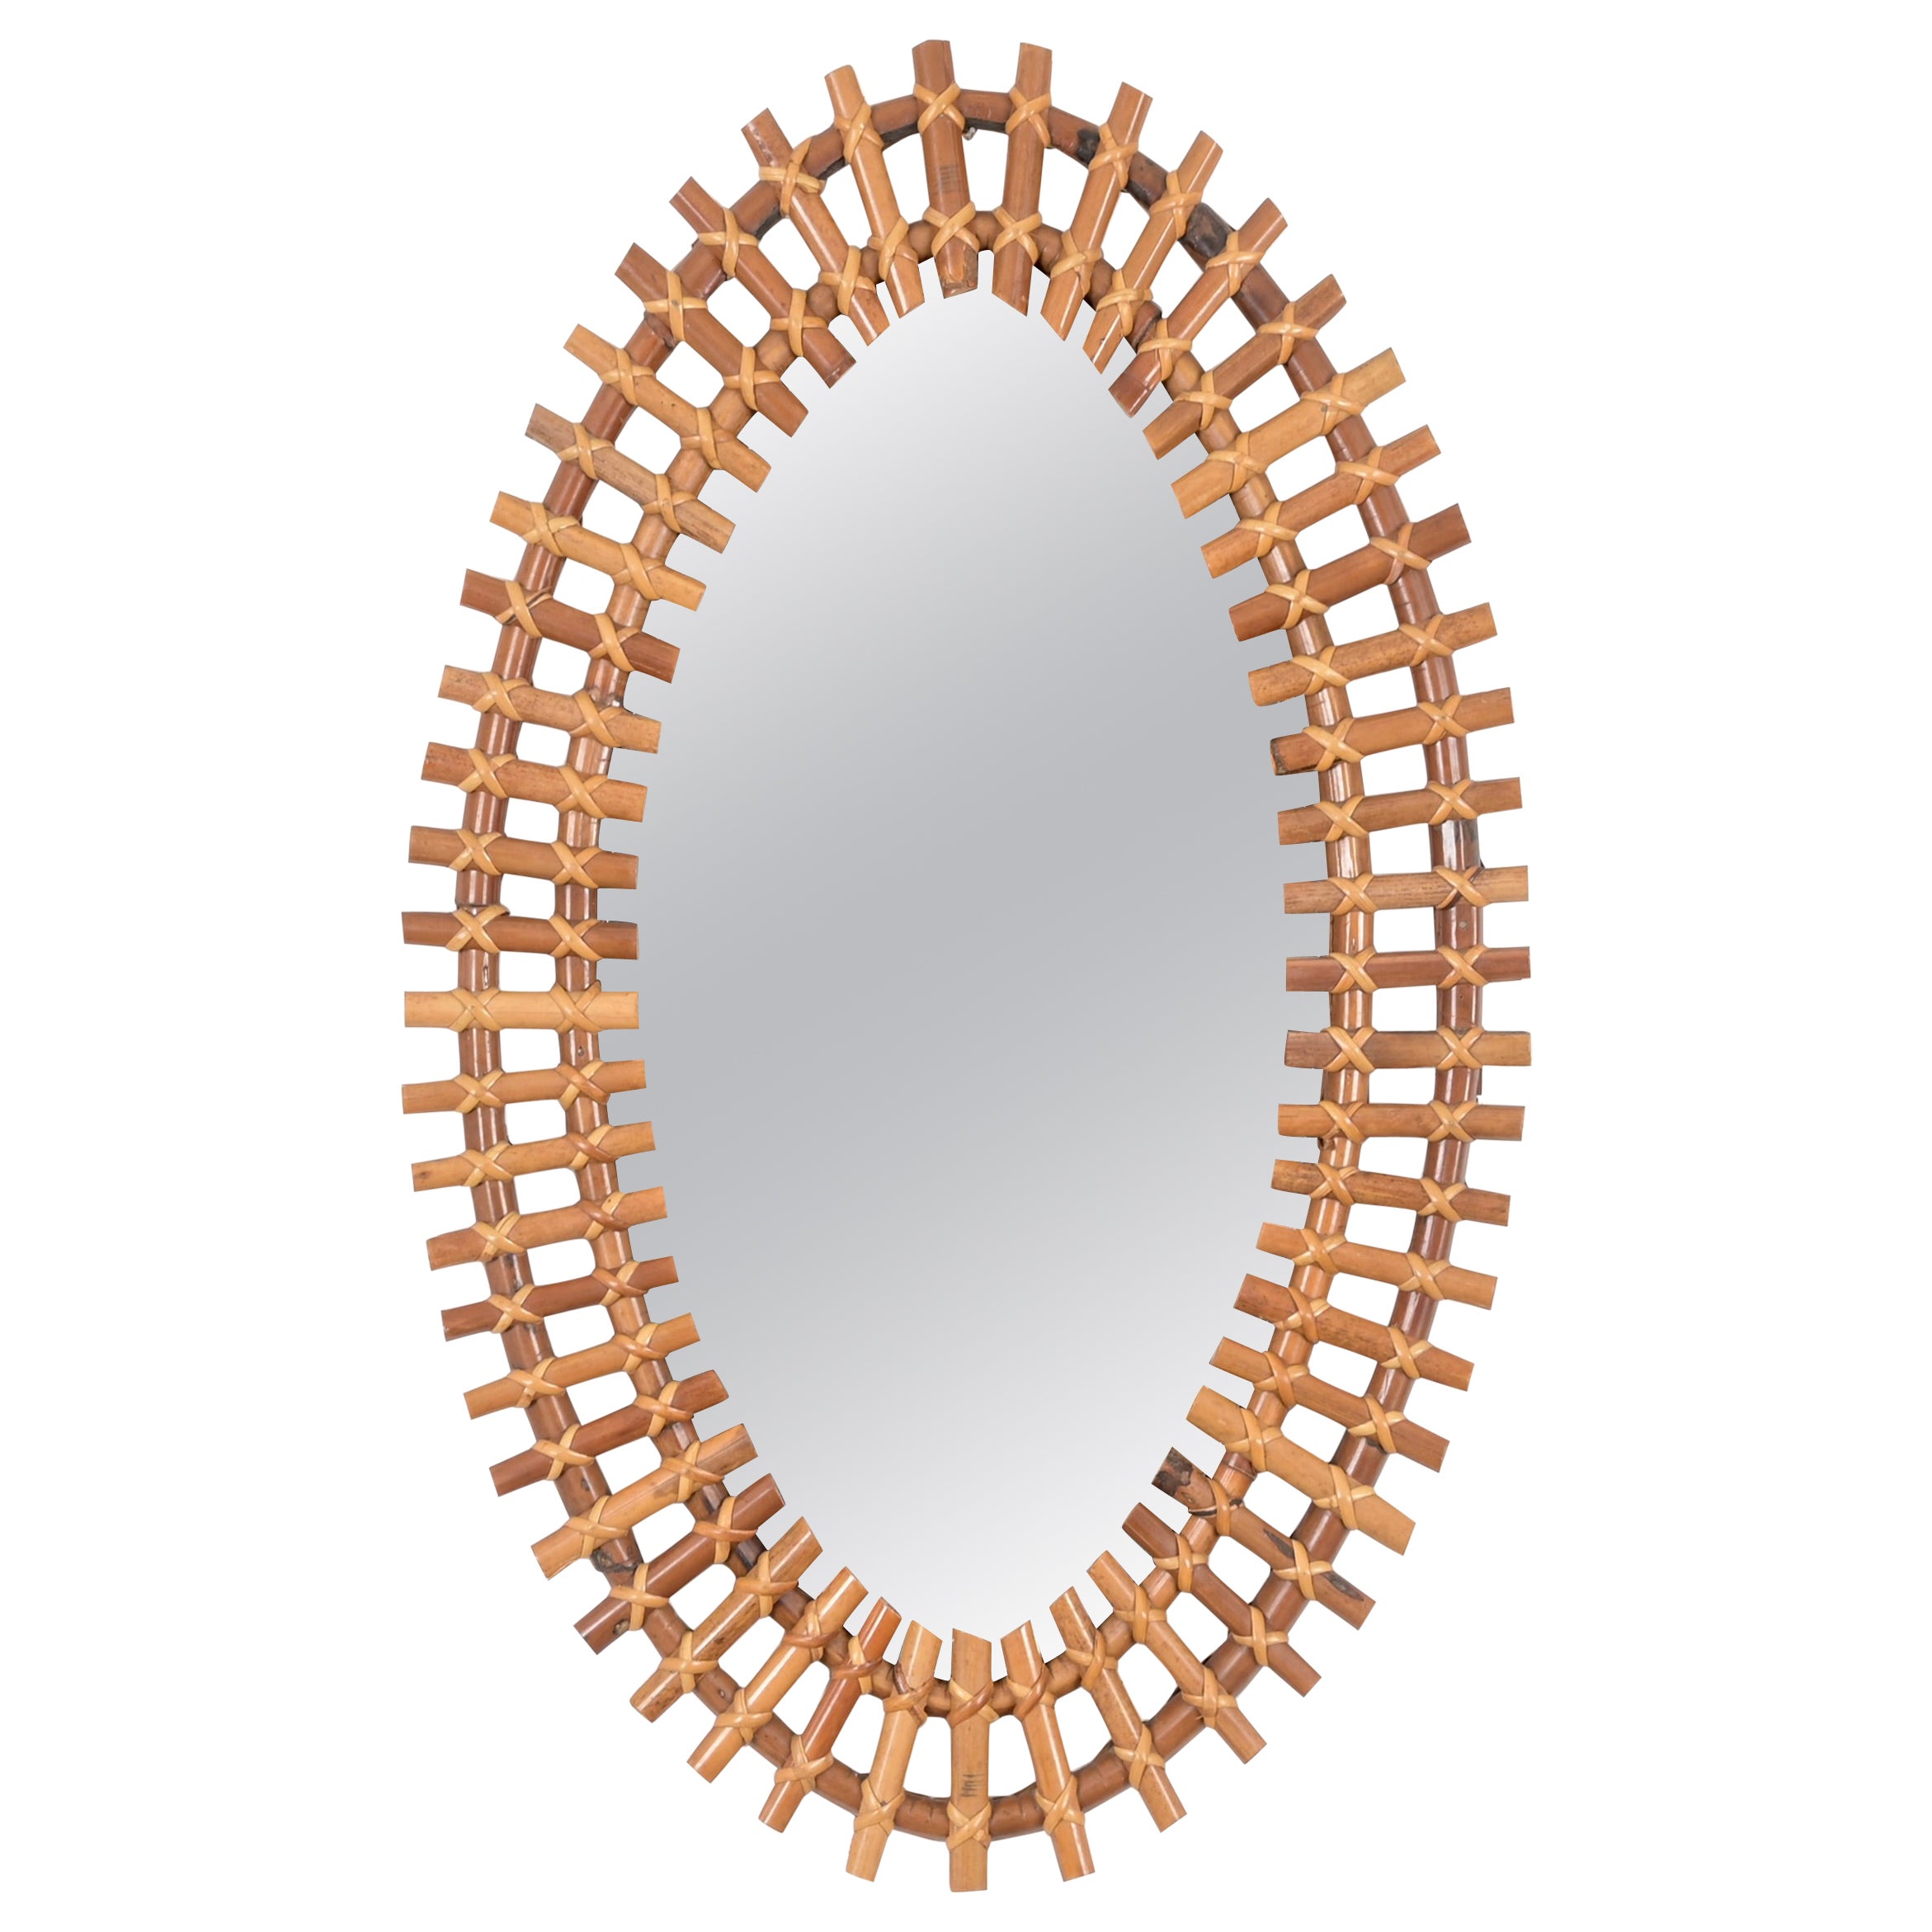 Midcentury French Riviera Oval Mirror in Rattan Wicker and Bamboo, Italy 1960s